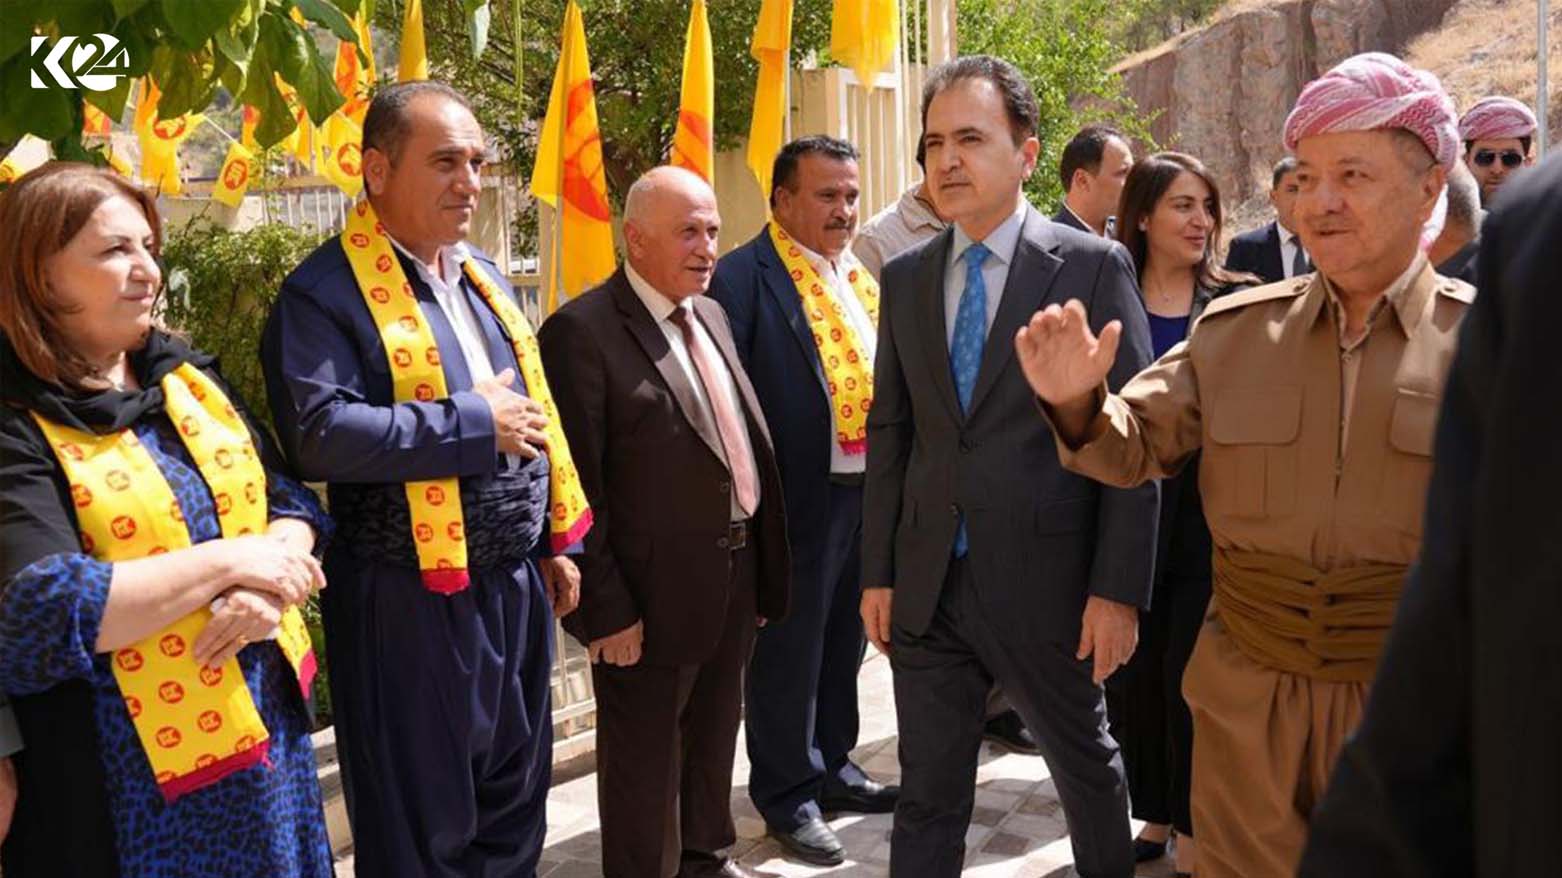 Kurdistan Democratic Party (KDP) President Masoud Barzani (right) greeted by his party's members in Duhok province's Amedi district, Aug. 19, 2023. (Photo: Submitted to Kurdistan 24)